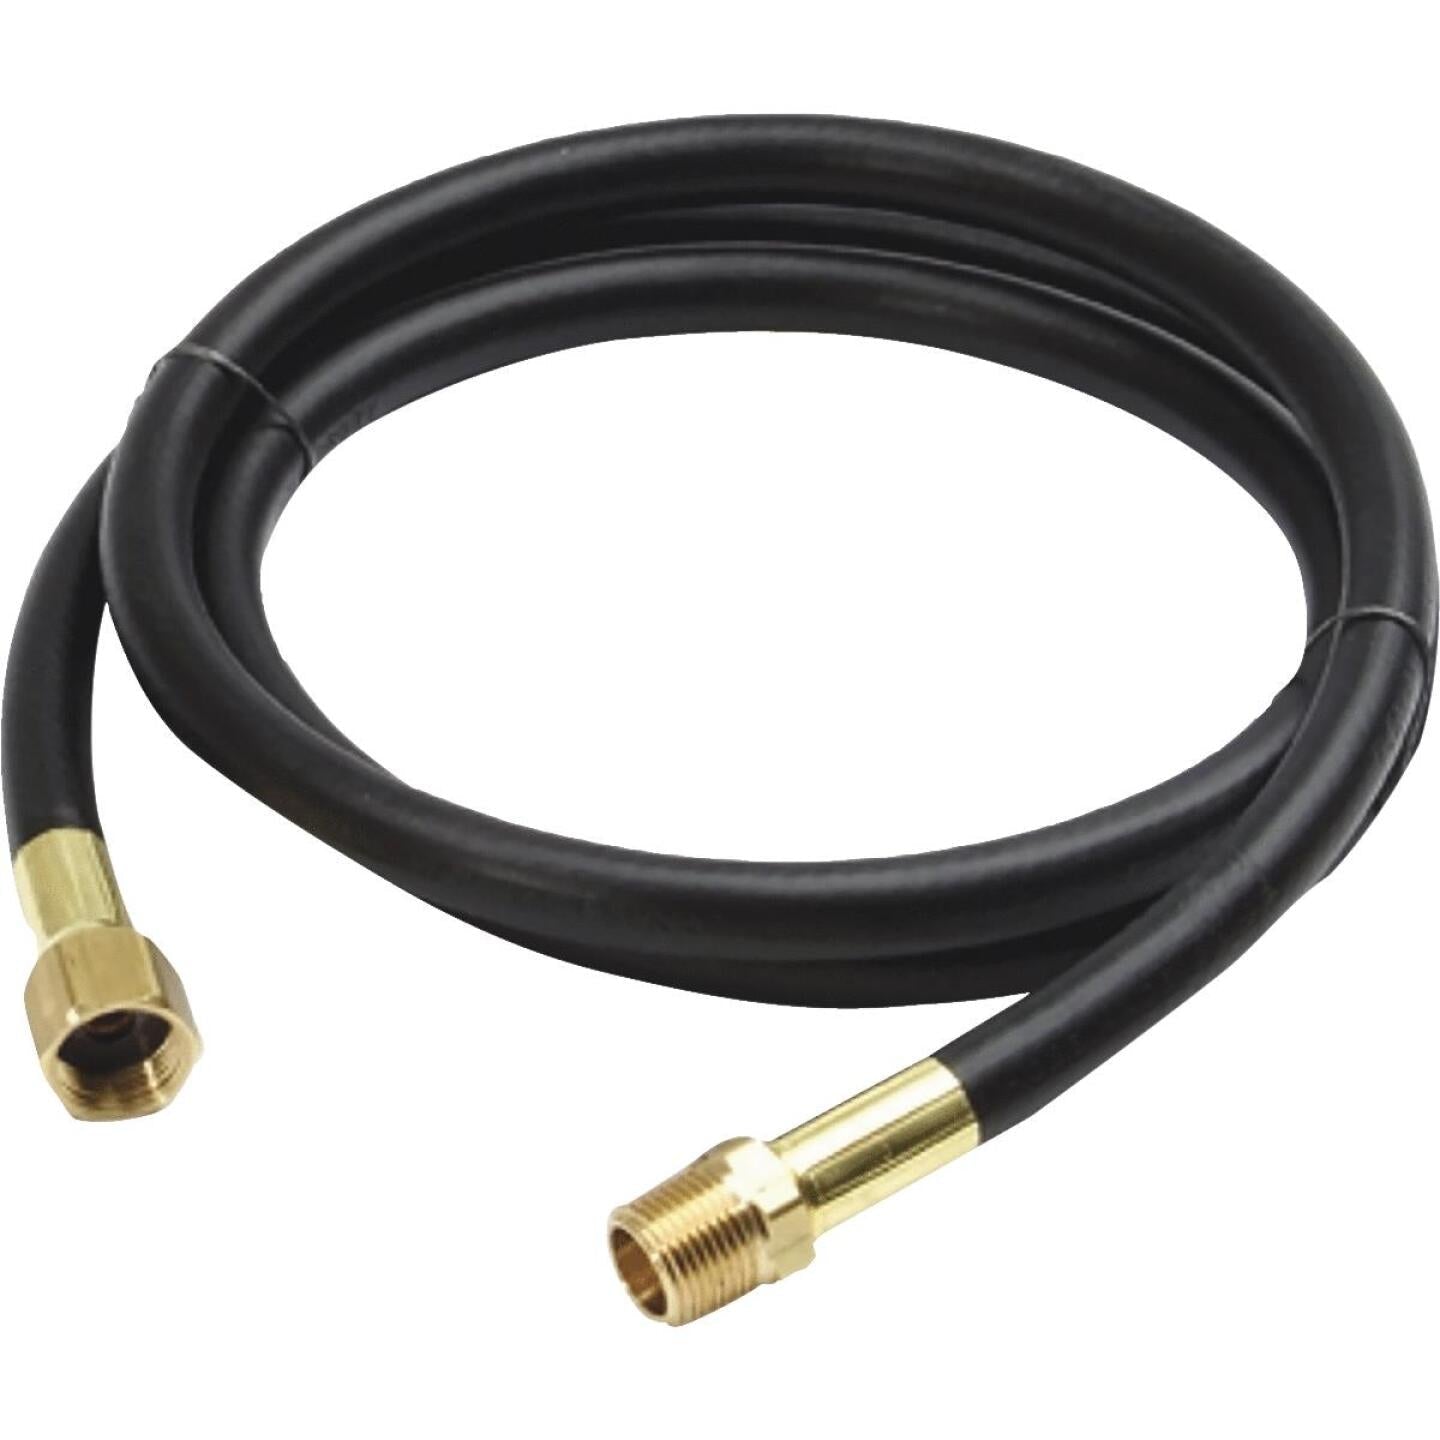 Mr. Heater, MR. HEATER 5 Ft. x 3/8 In. FPT x 3/8 In. MPT Low Pressure to Low Pressure LP Hose Assembly